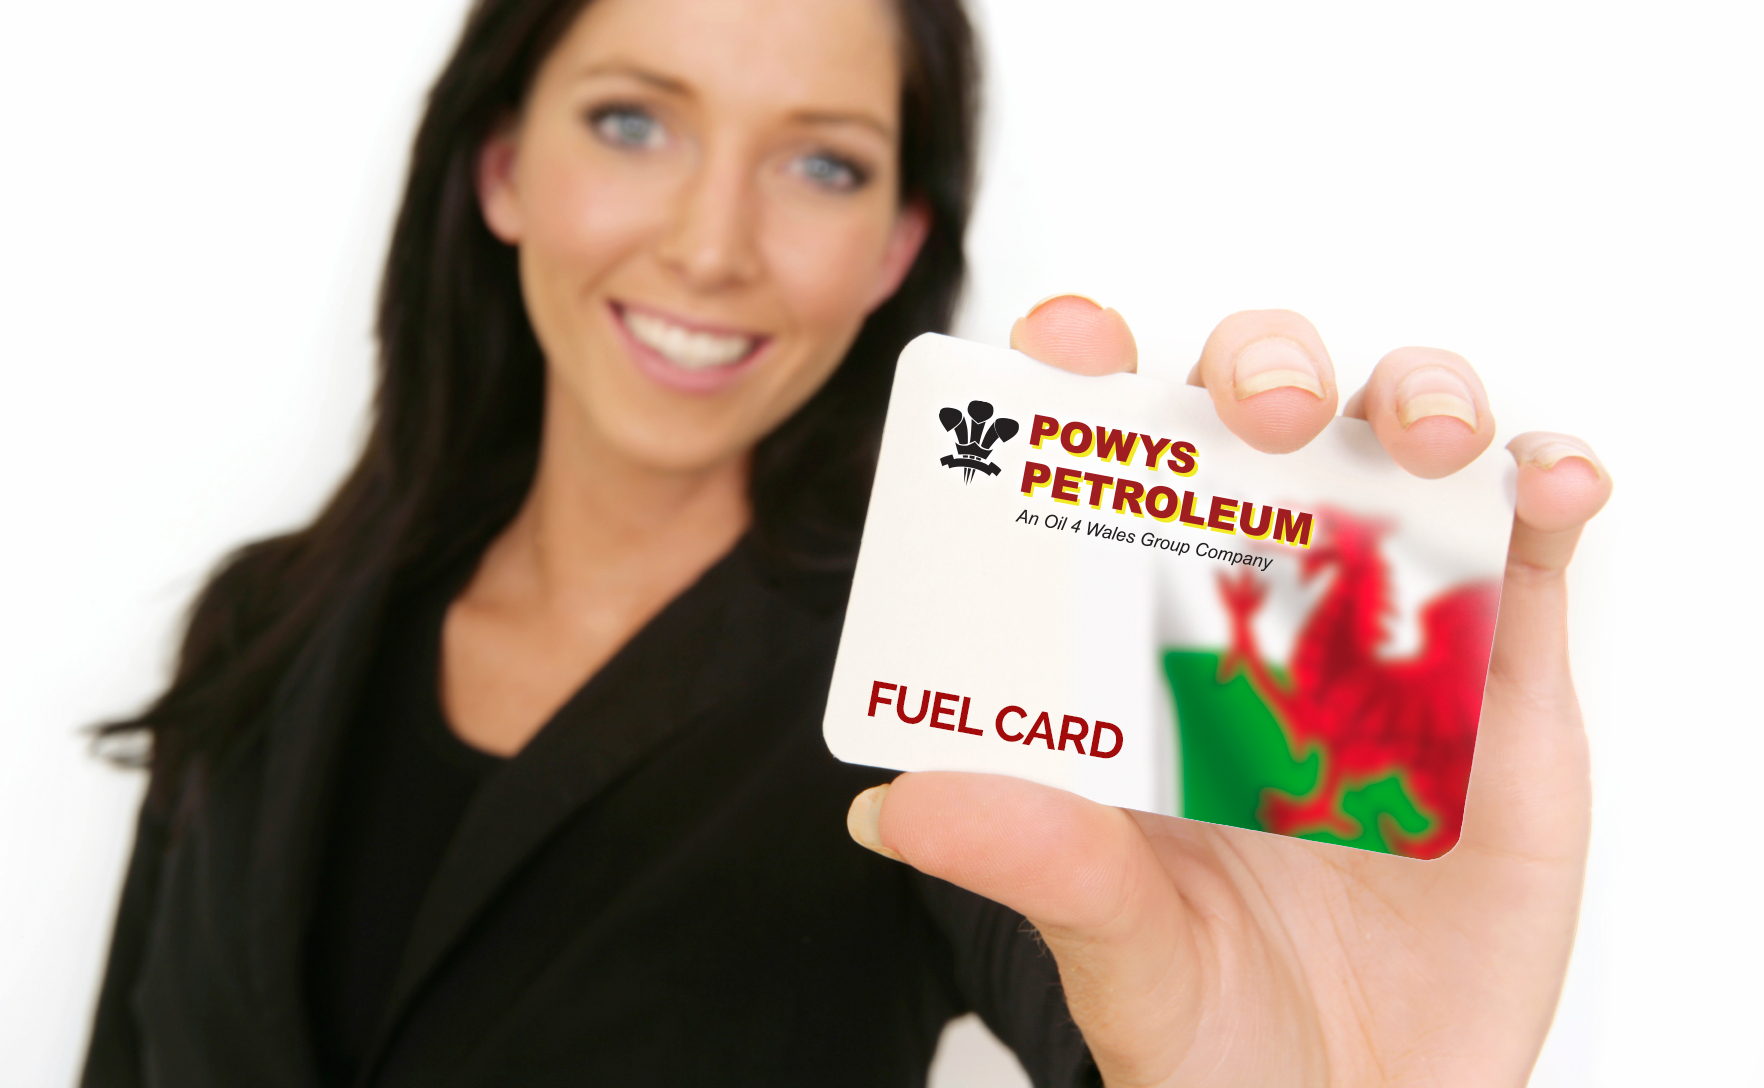 Oil4Wales fuel cards payments